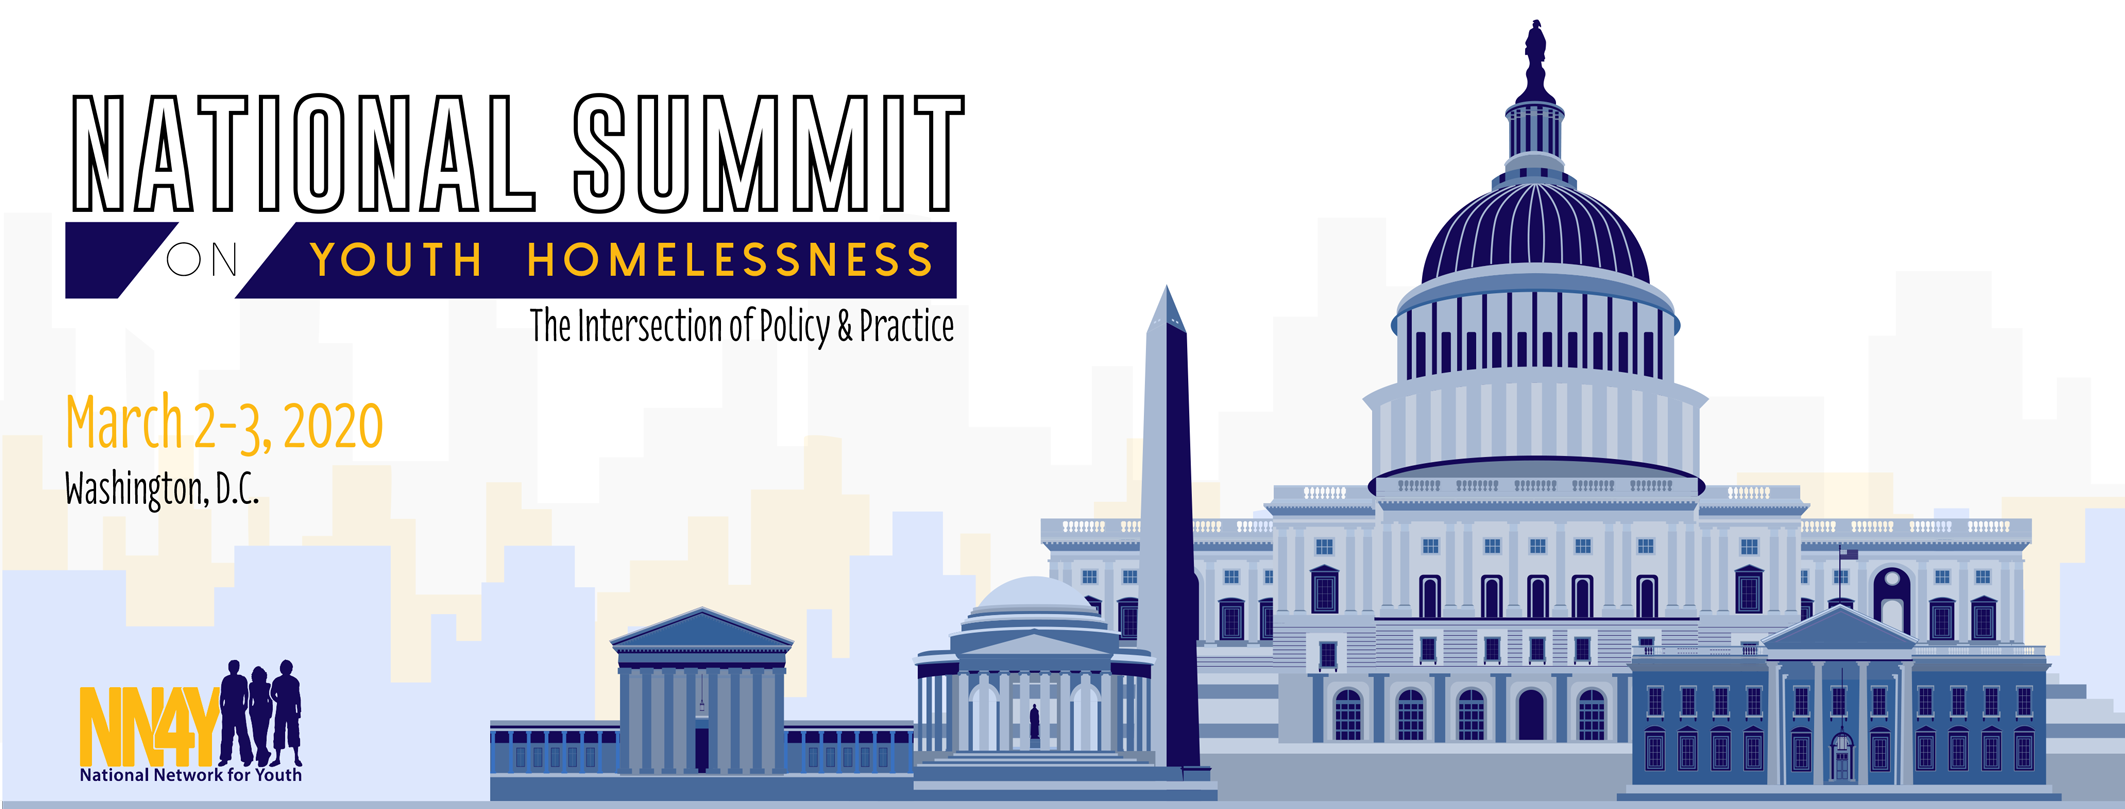 2019 National Summit on Youth Homelessness